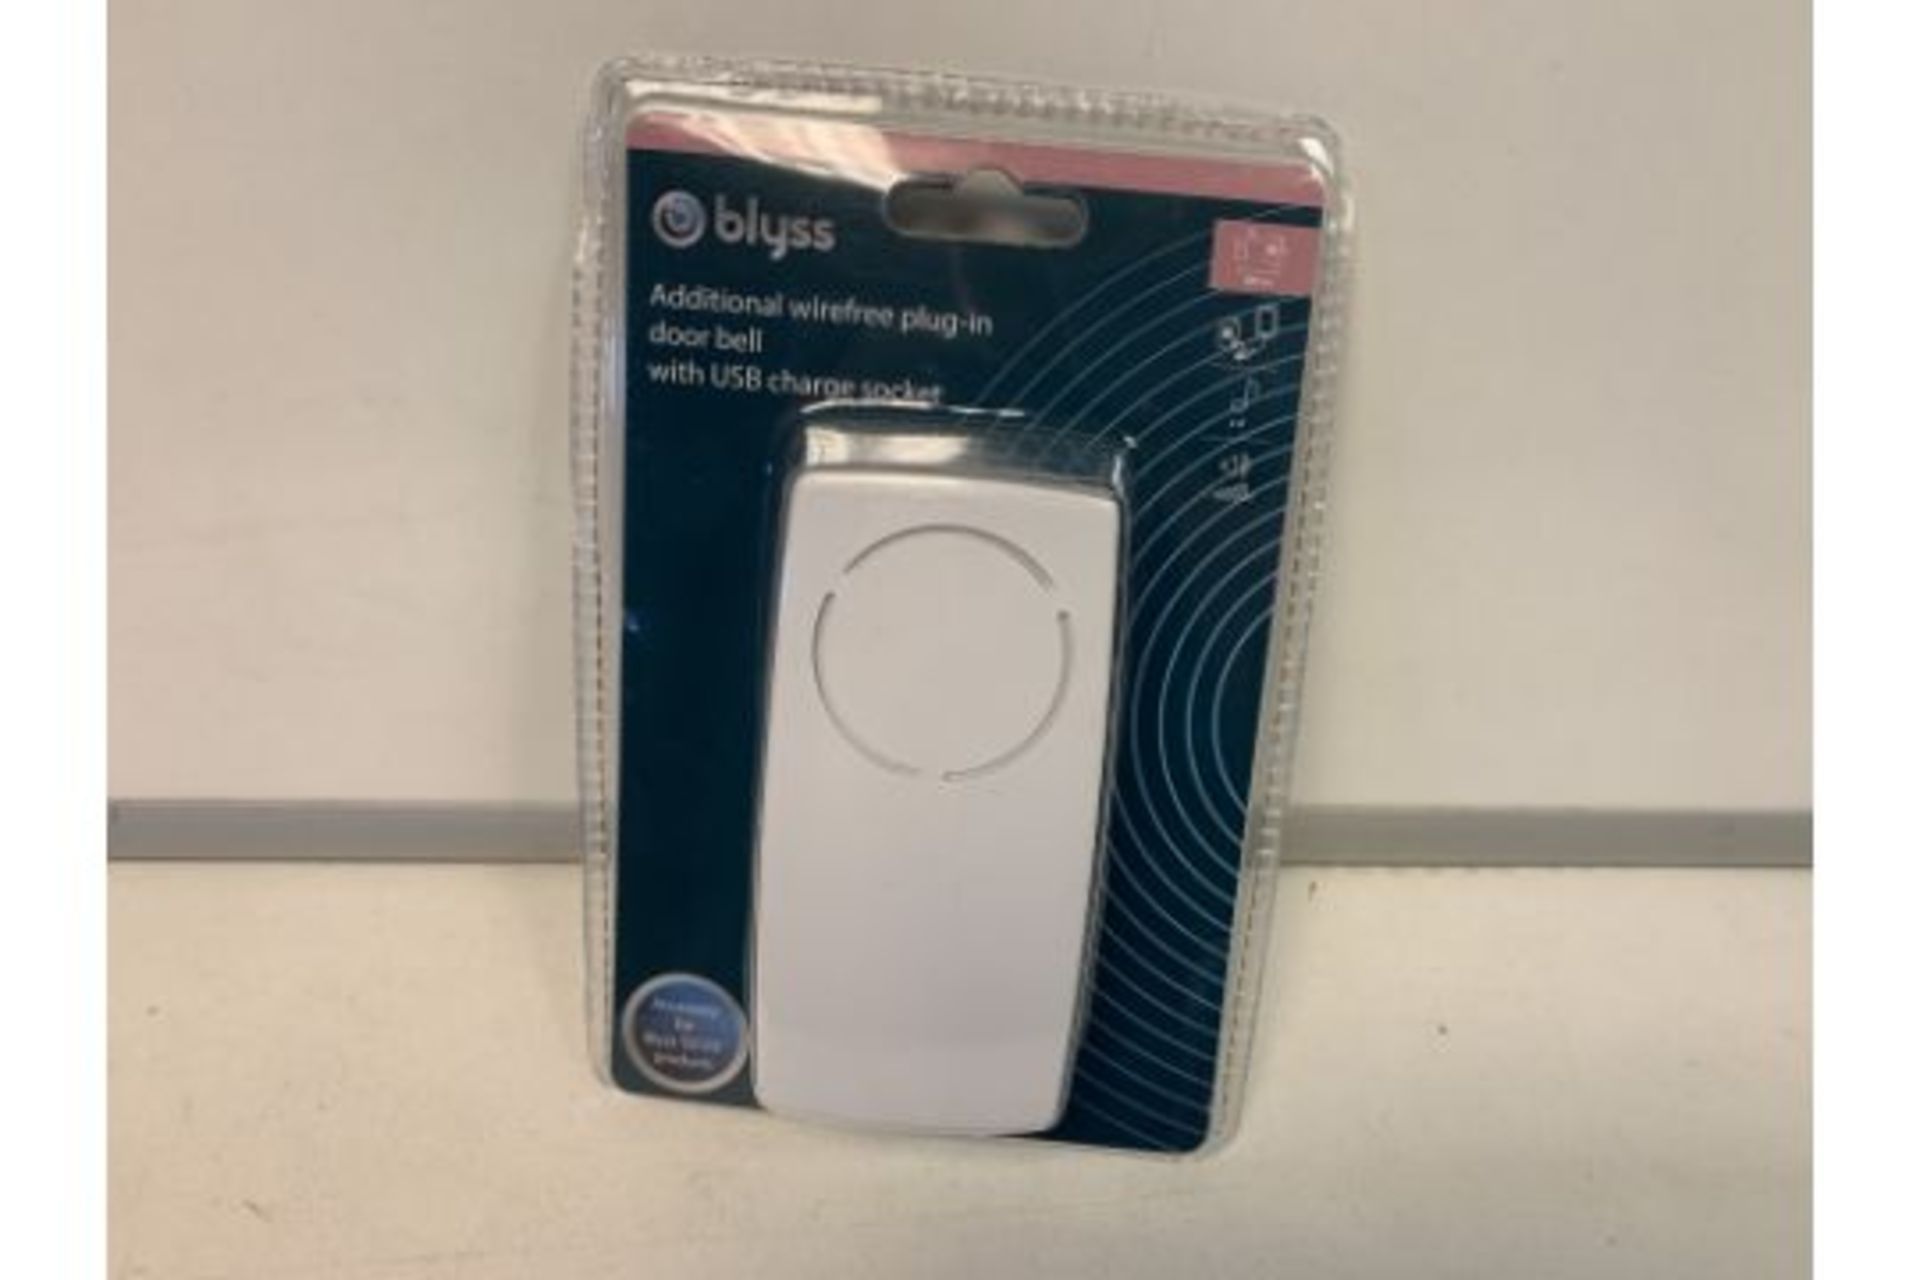 36 X NEW PACKAGED BLYSS ADDITIONAL WIREFREE PLUG IN DOOR BELL WITH USB CHARGE SOCKET (1381/3)